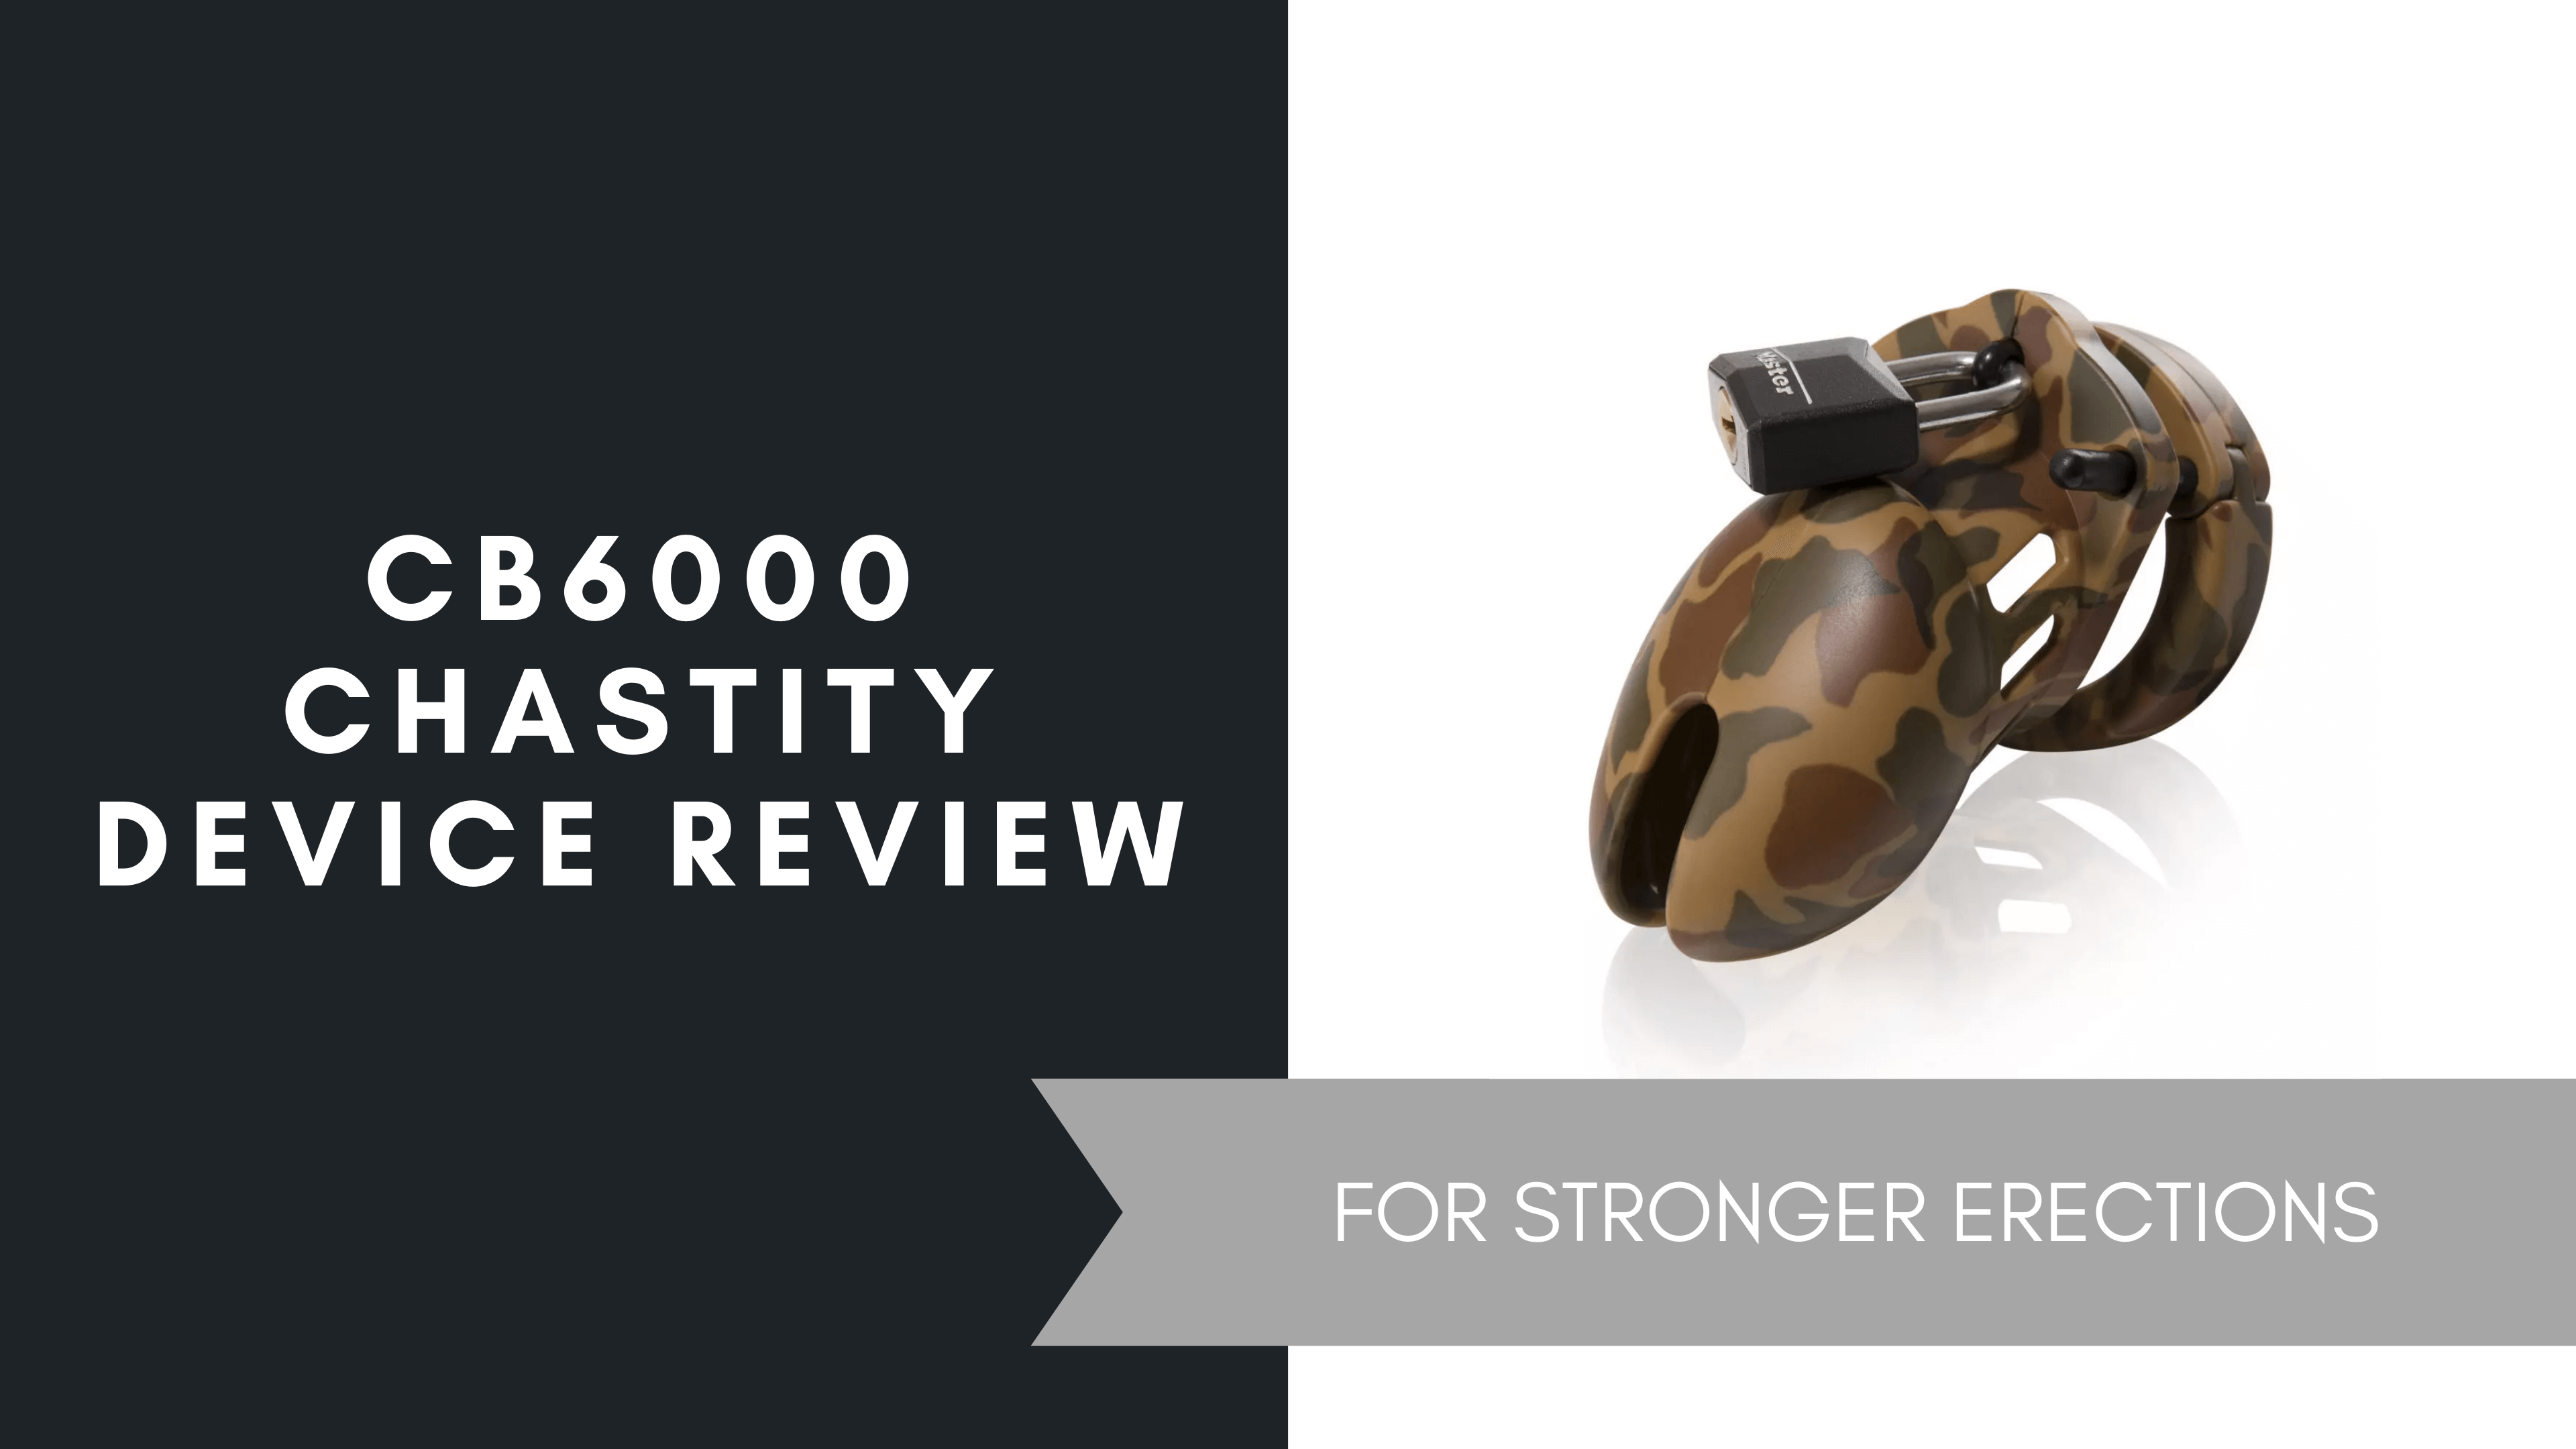 CB6000 Chastity Device Review, June 2021